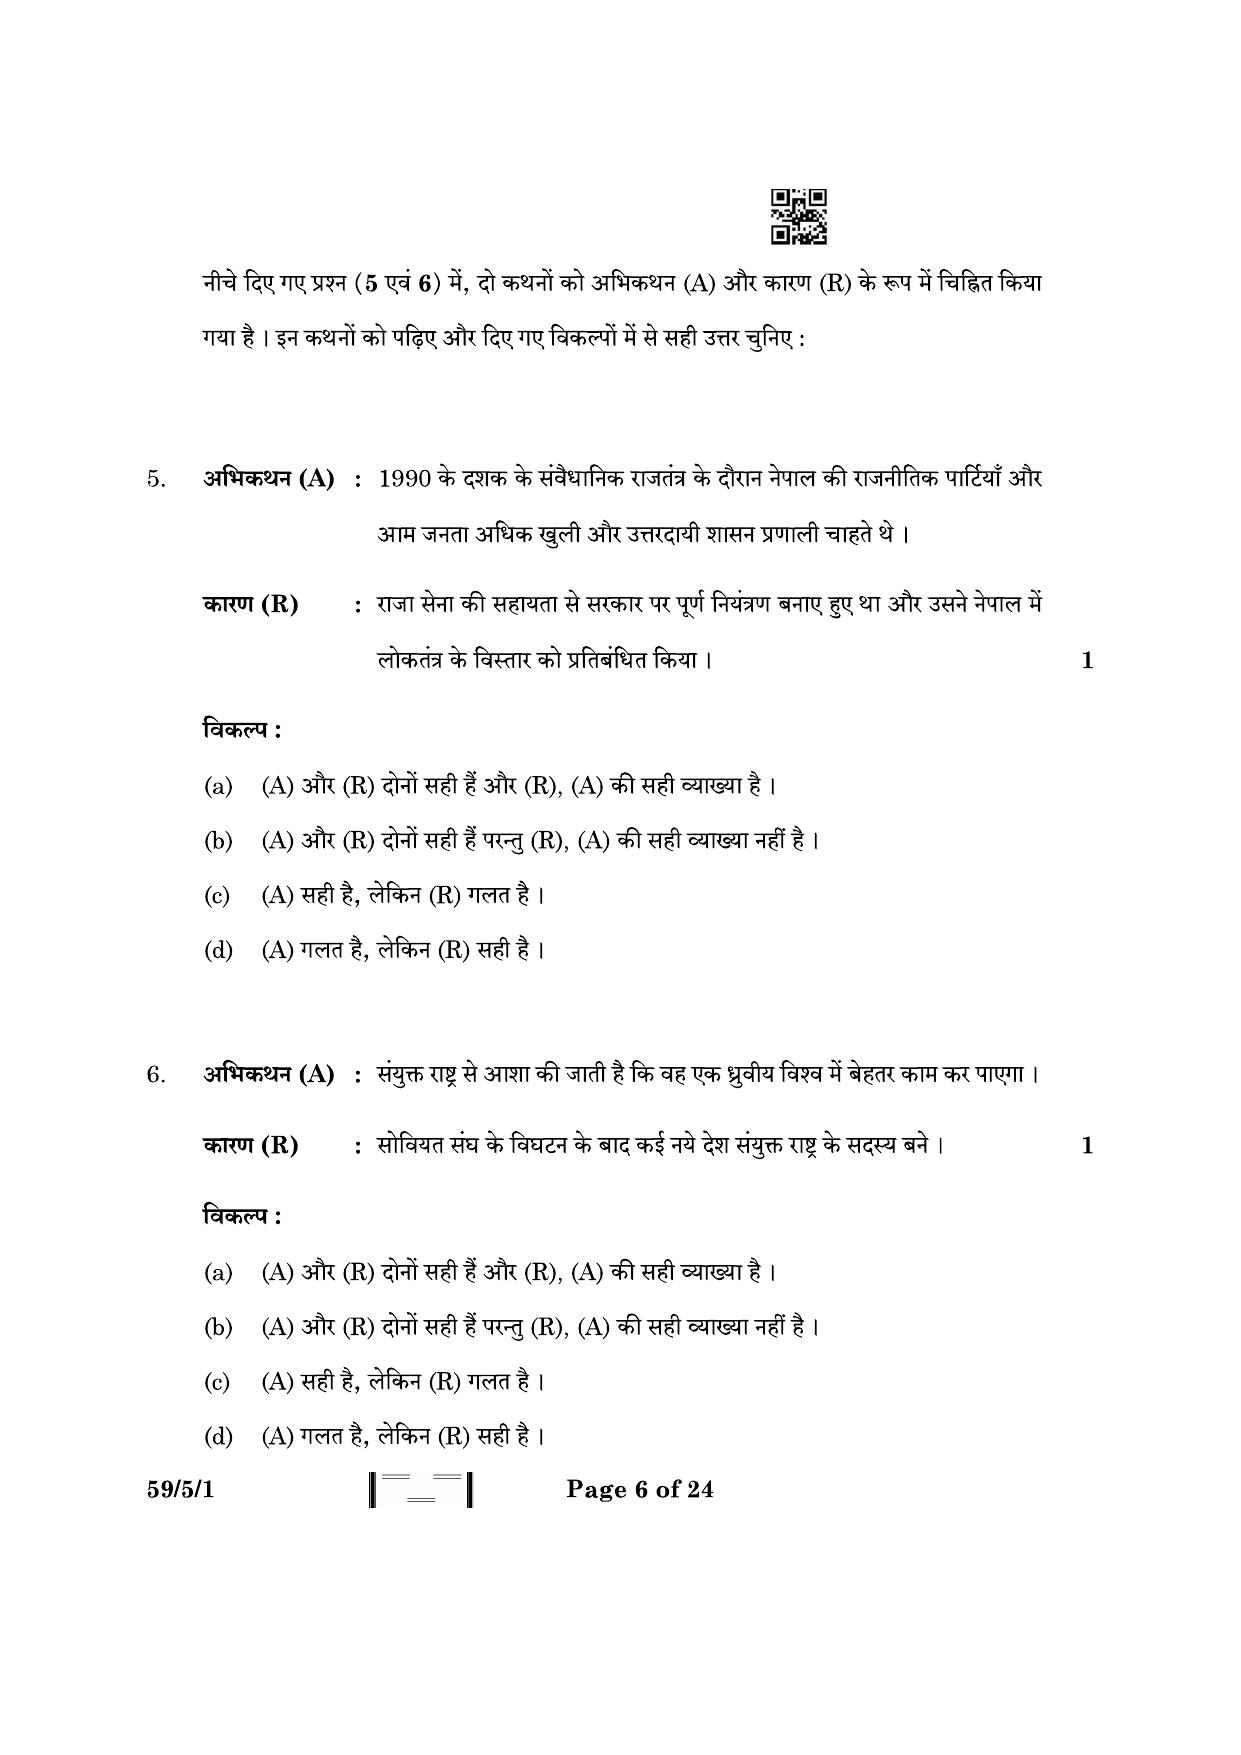 CBSE Class 12 59-5-1 Political Science 2023 Question Paper - Page 6